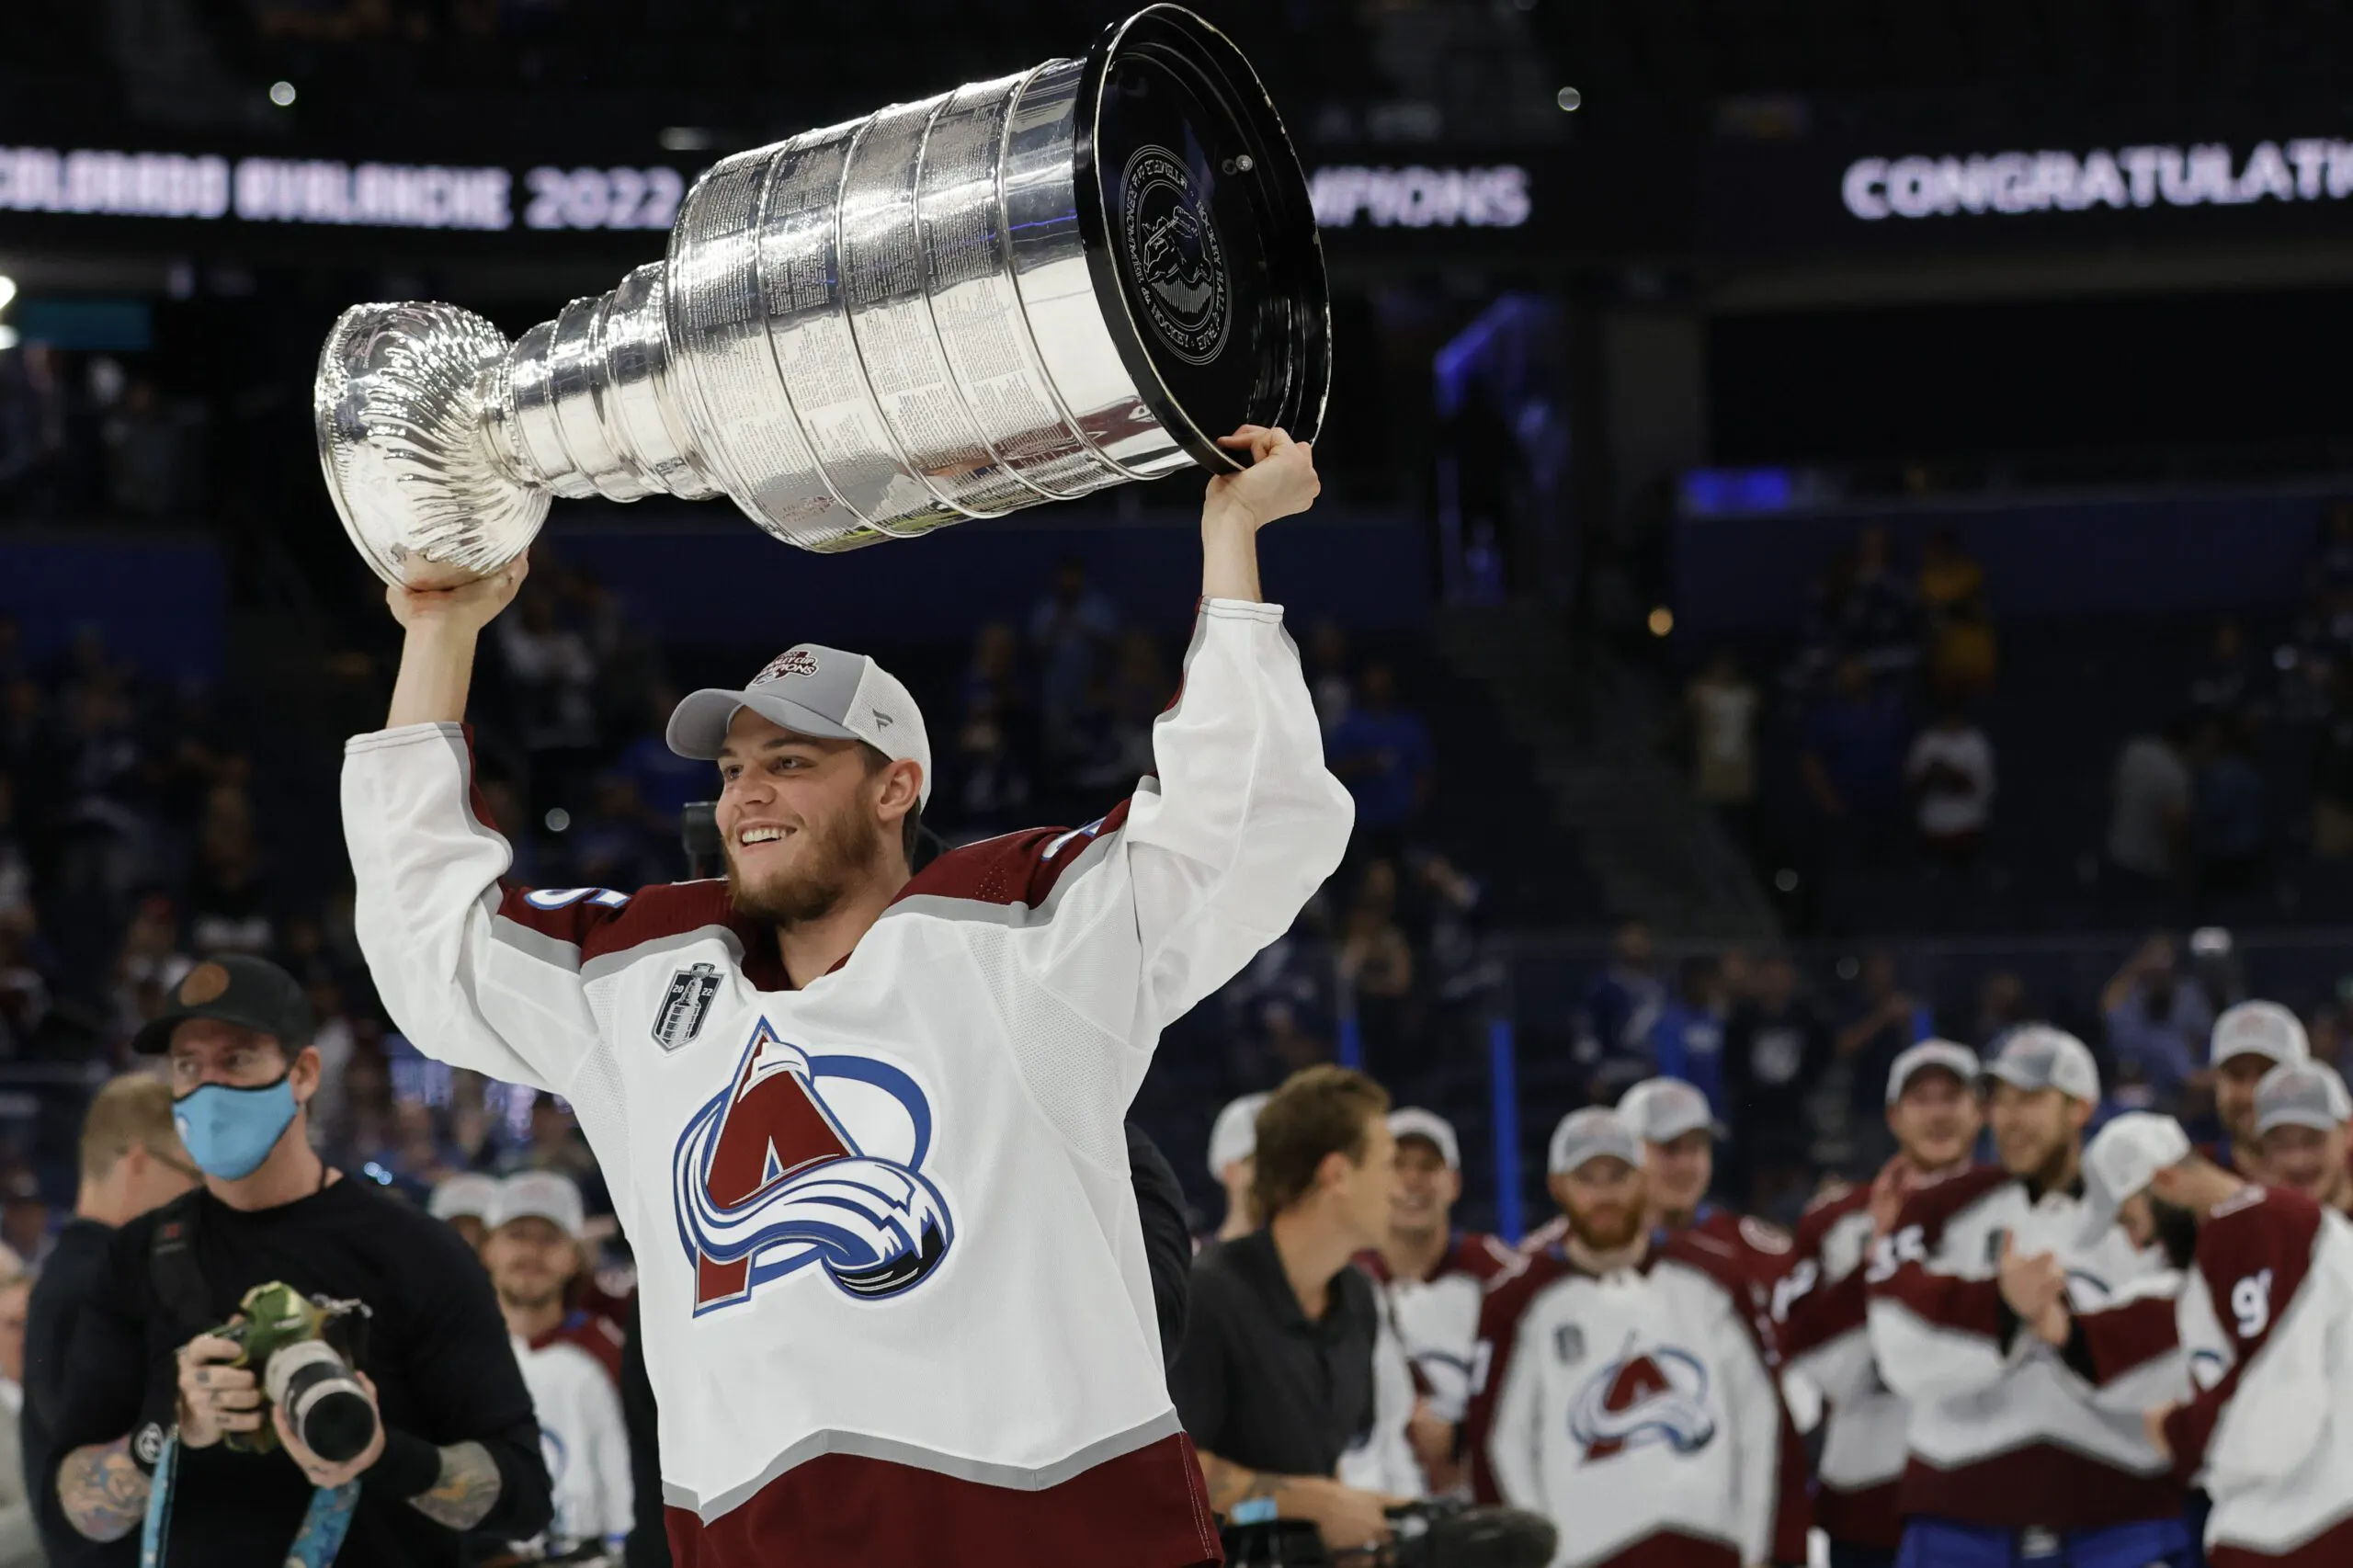 My precious: Do you need players with Stanley Cup rings when building a contender?